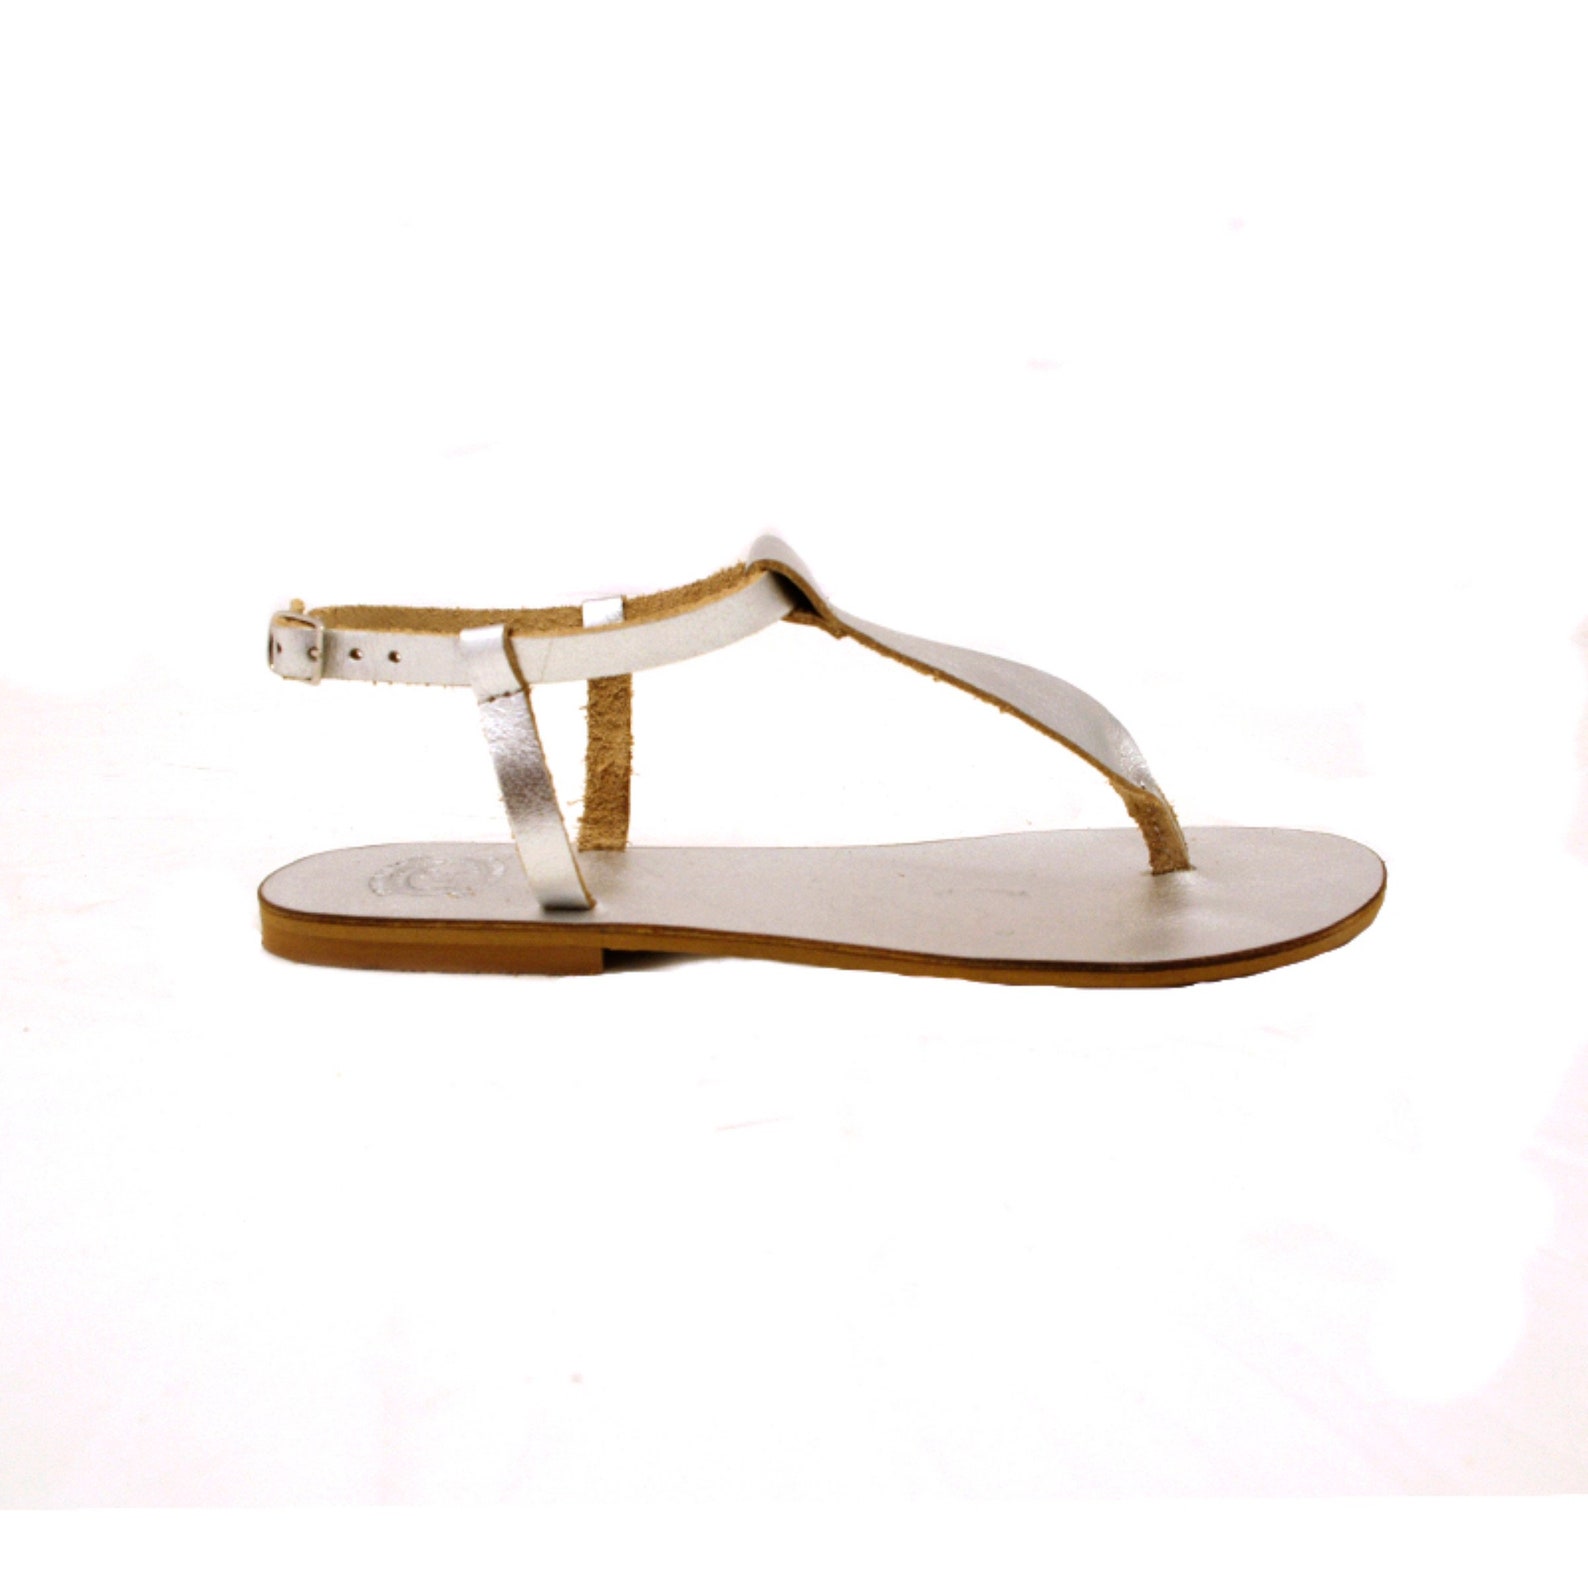 Silver Thong Sandals for Women Genuine Leather Sandals - Etsy